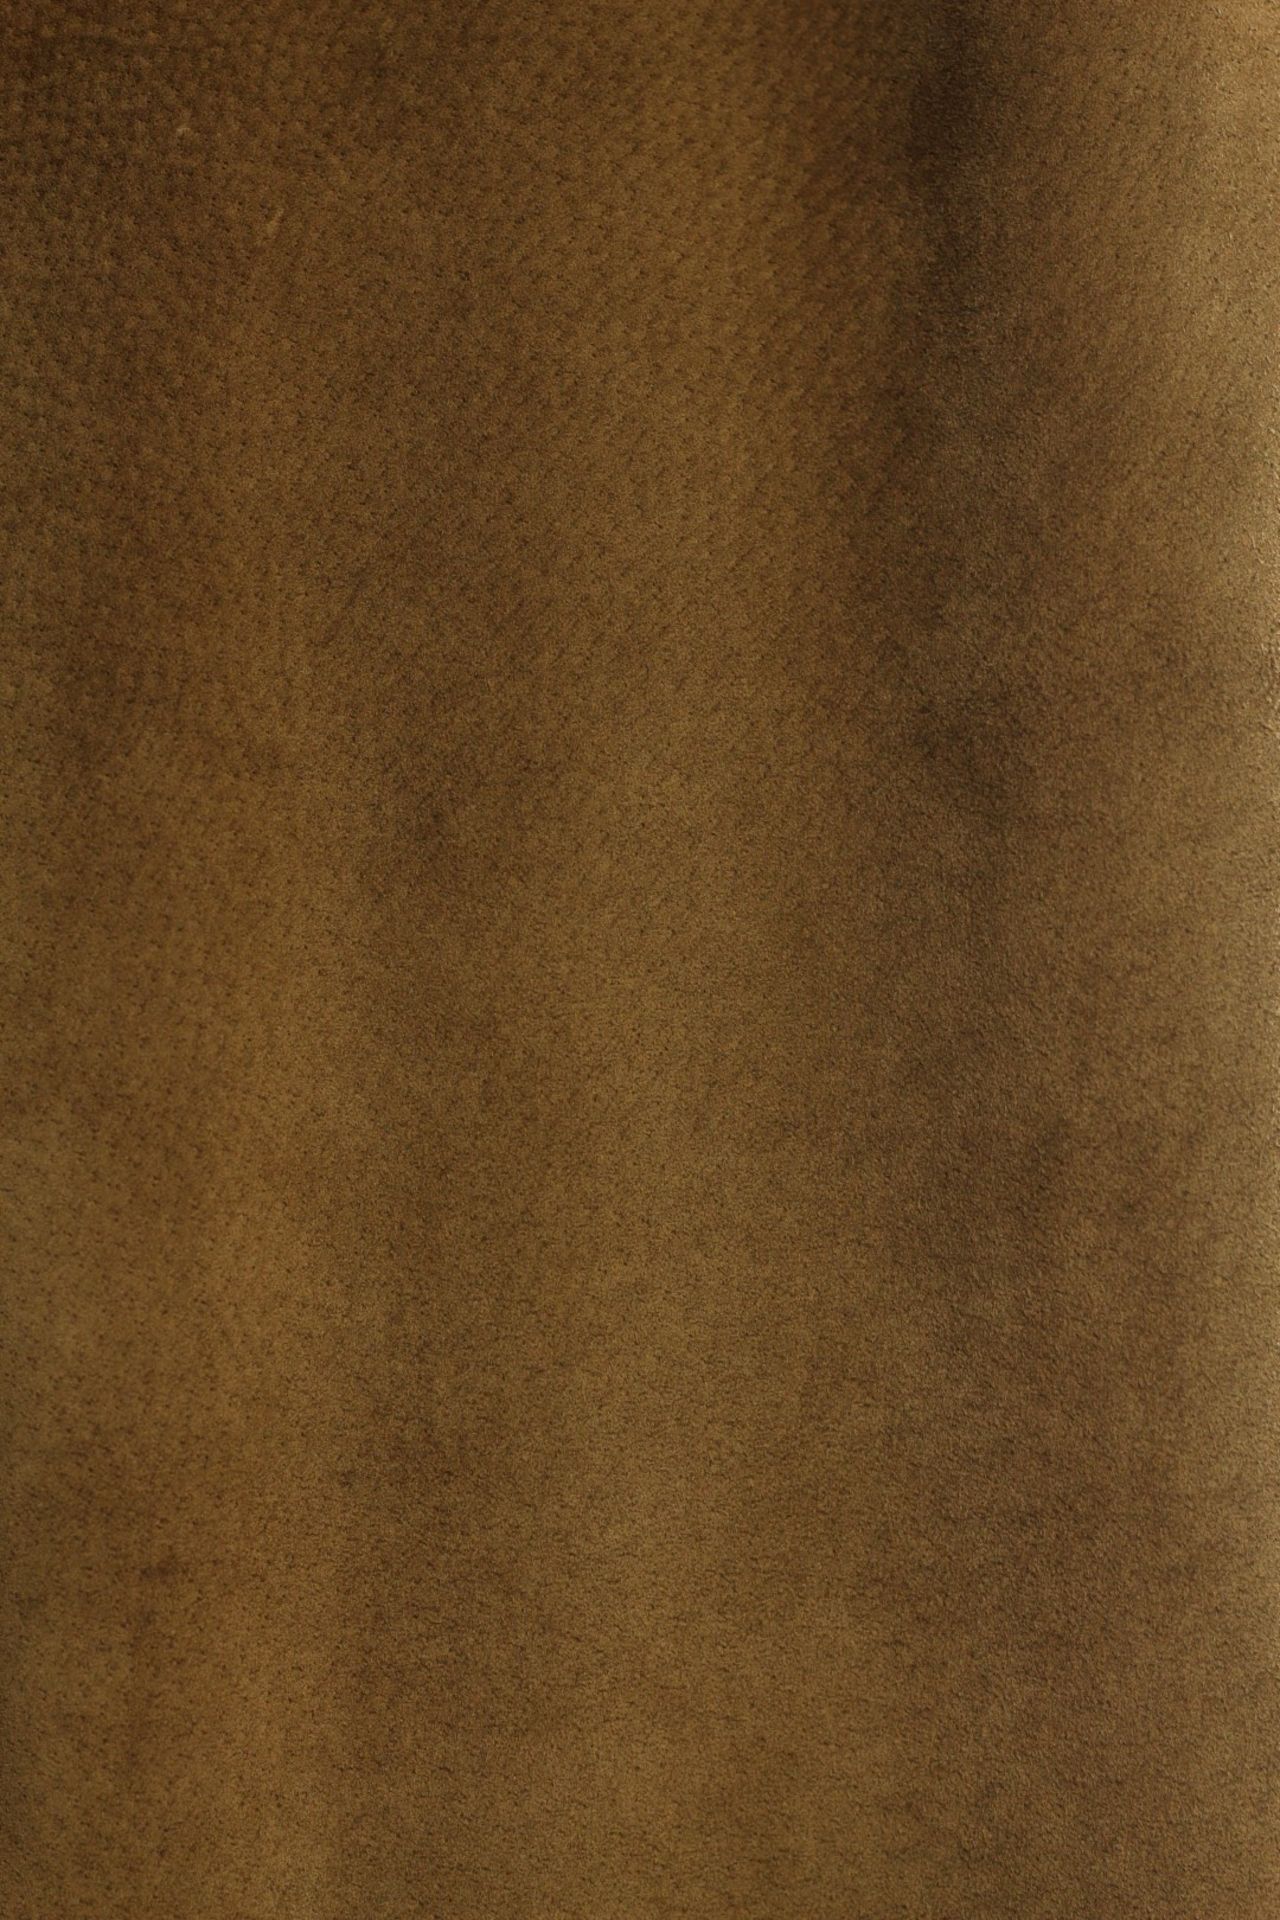 1 x Boutique Le Duc Fawn Brown Trousers - Size: 12 - Material: Natural Suede - From a High End - Image 12 of 13